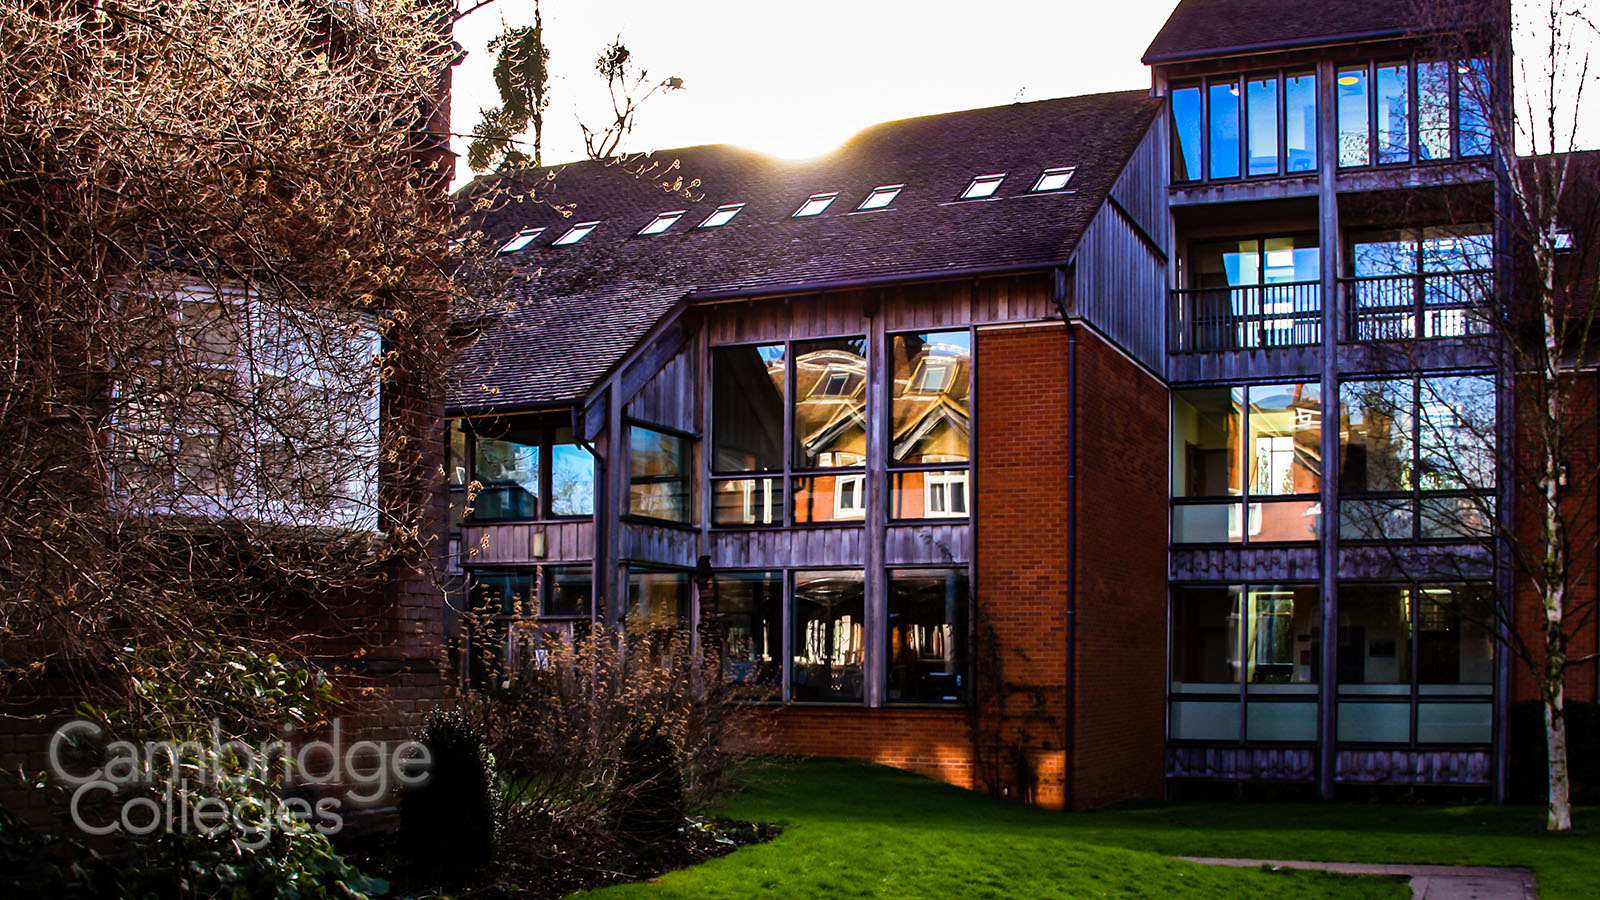 The library of Lucy Cavendish college